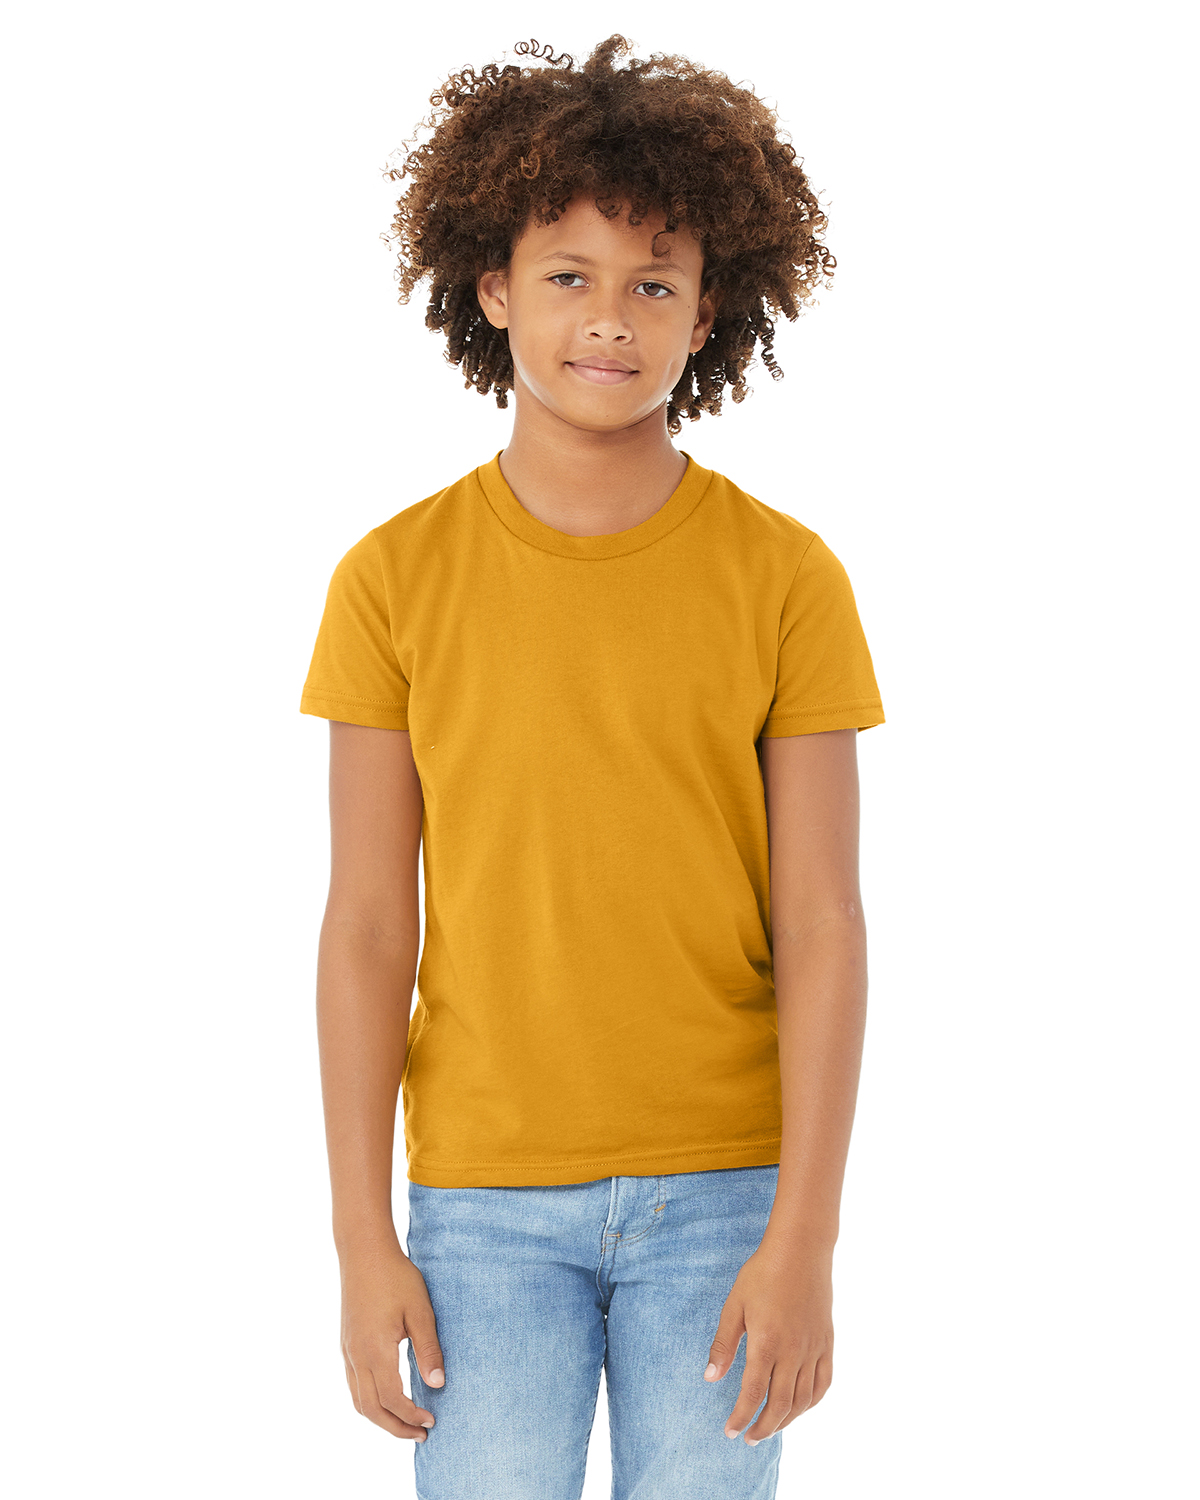 BELLA+CANVAS Youth Jersey Short Sleeve Tee. 